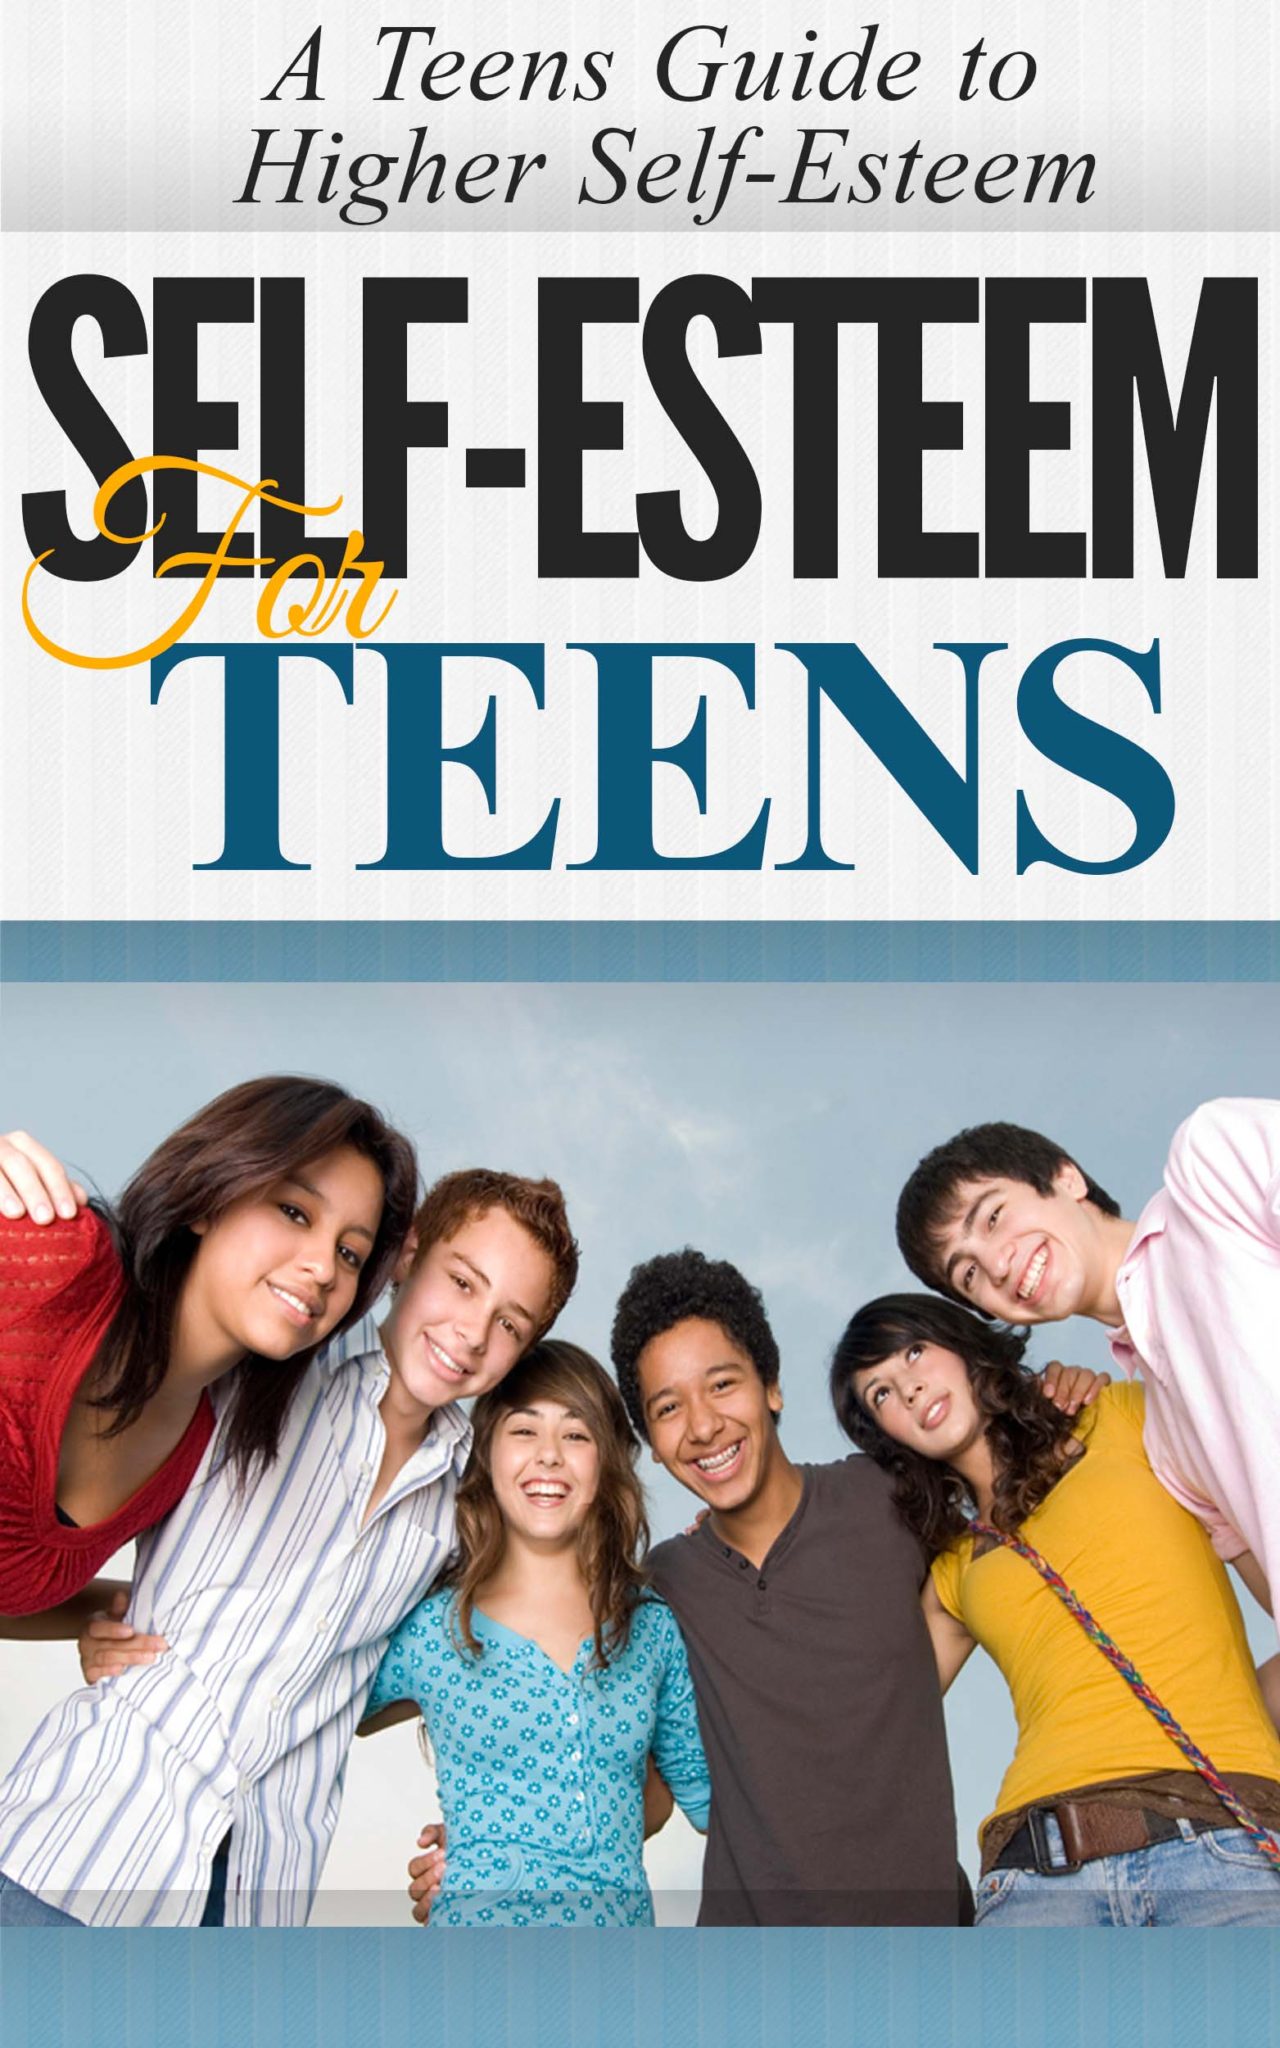 FREE: Self-Esteem For Teens: A Teens Guide to Higher Self-Esteem by Saloy Charles